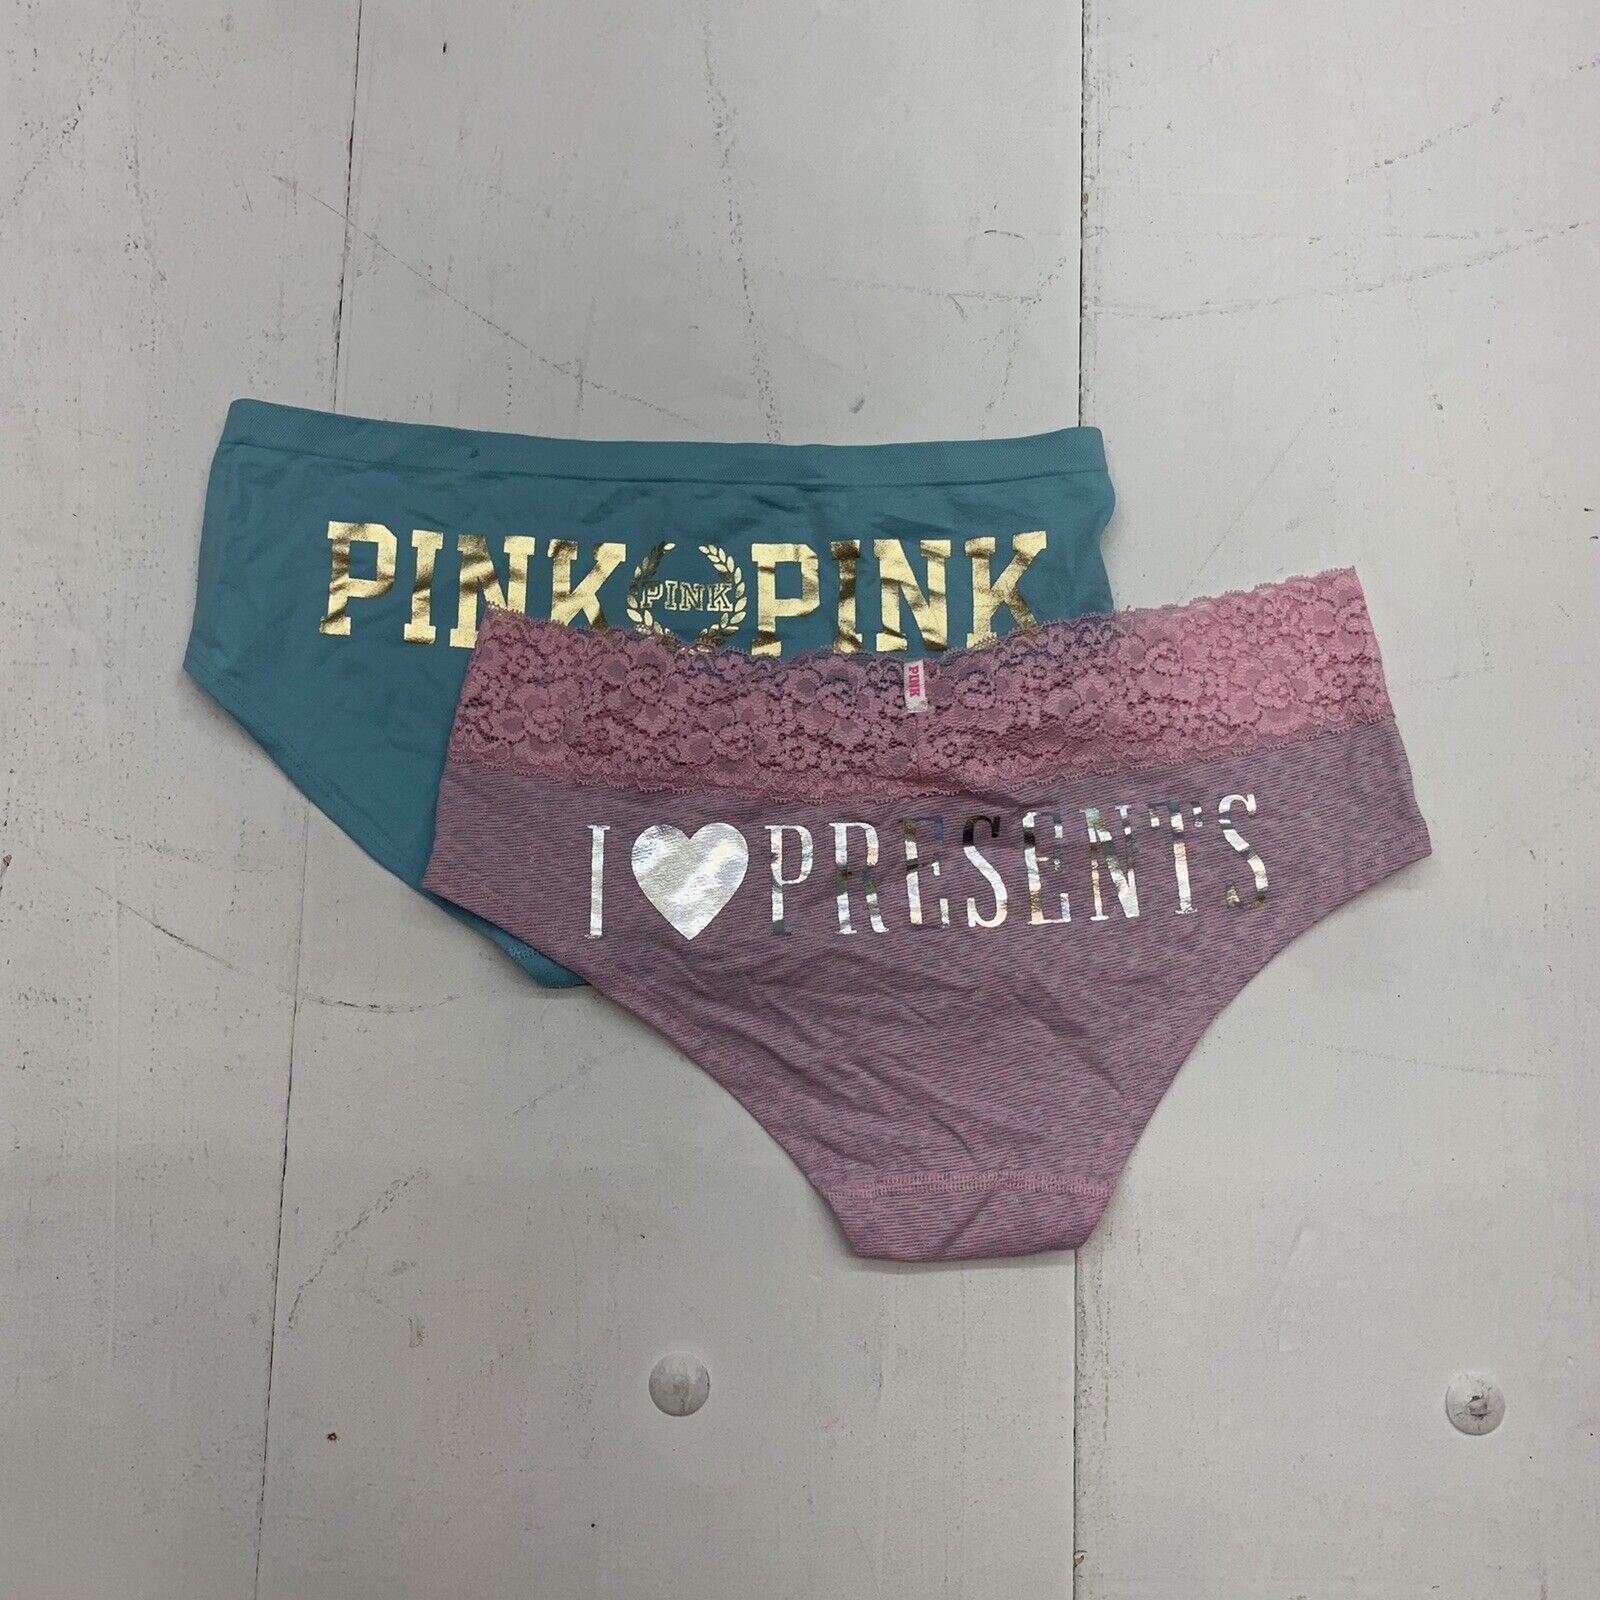 Victorias secret womens Low rise hipster panties Blue and purple